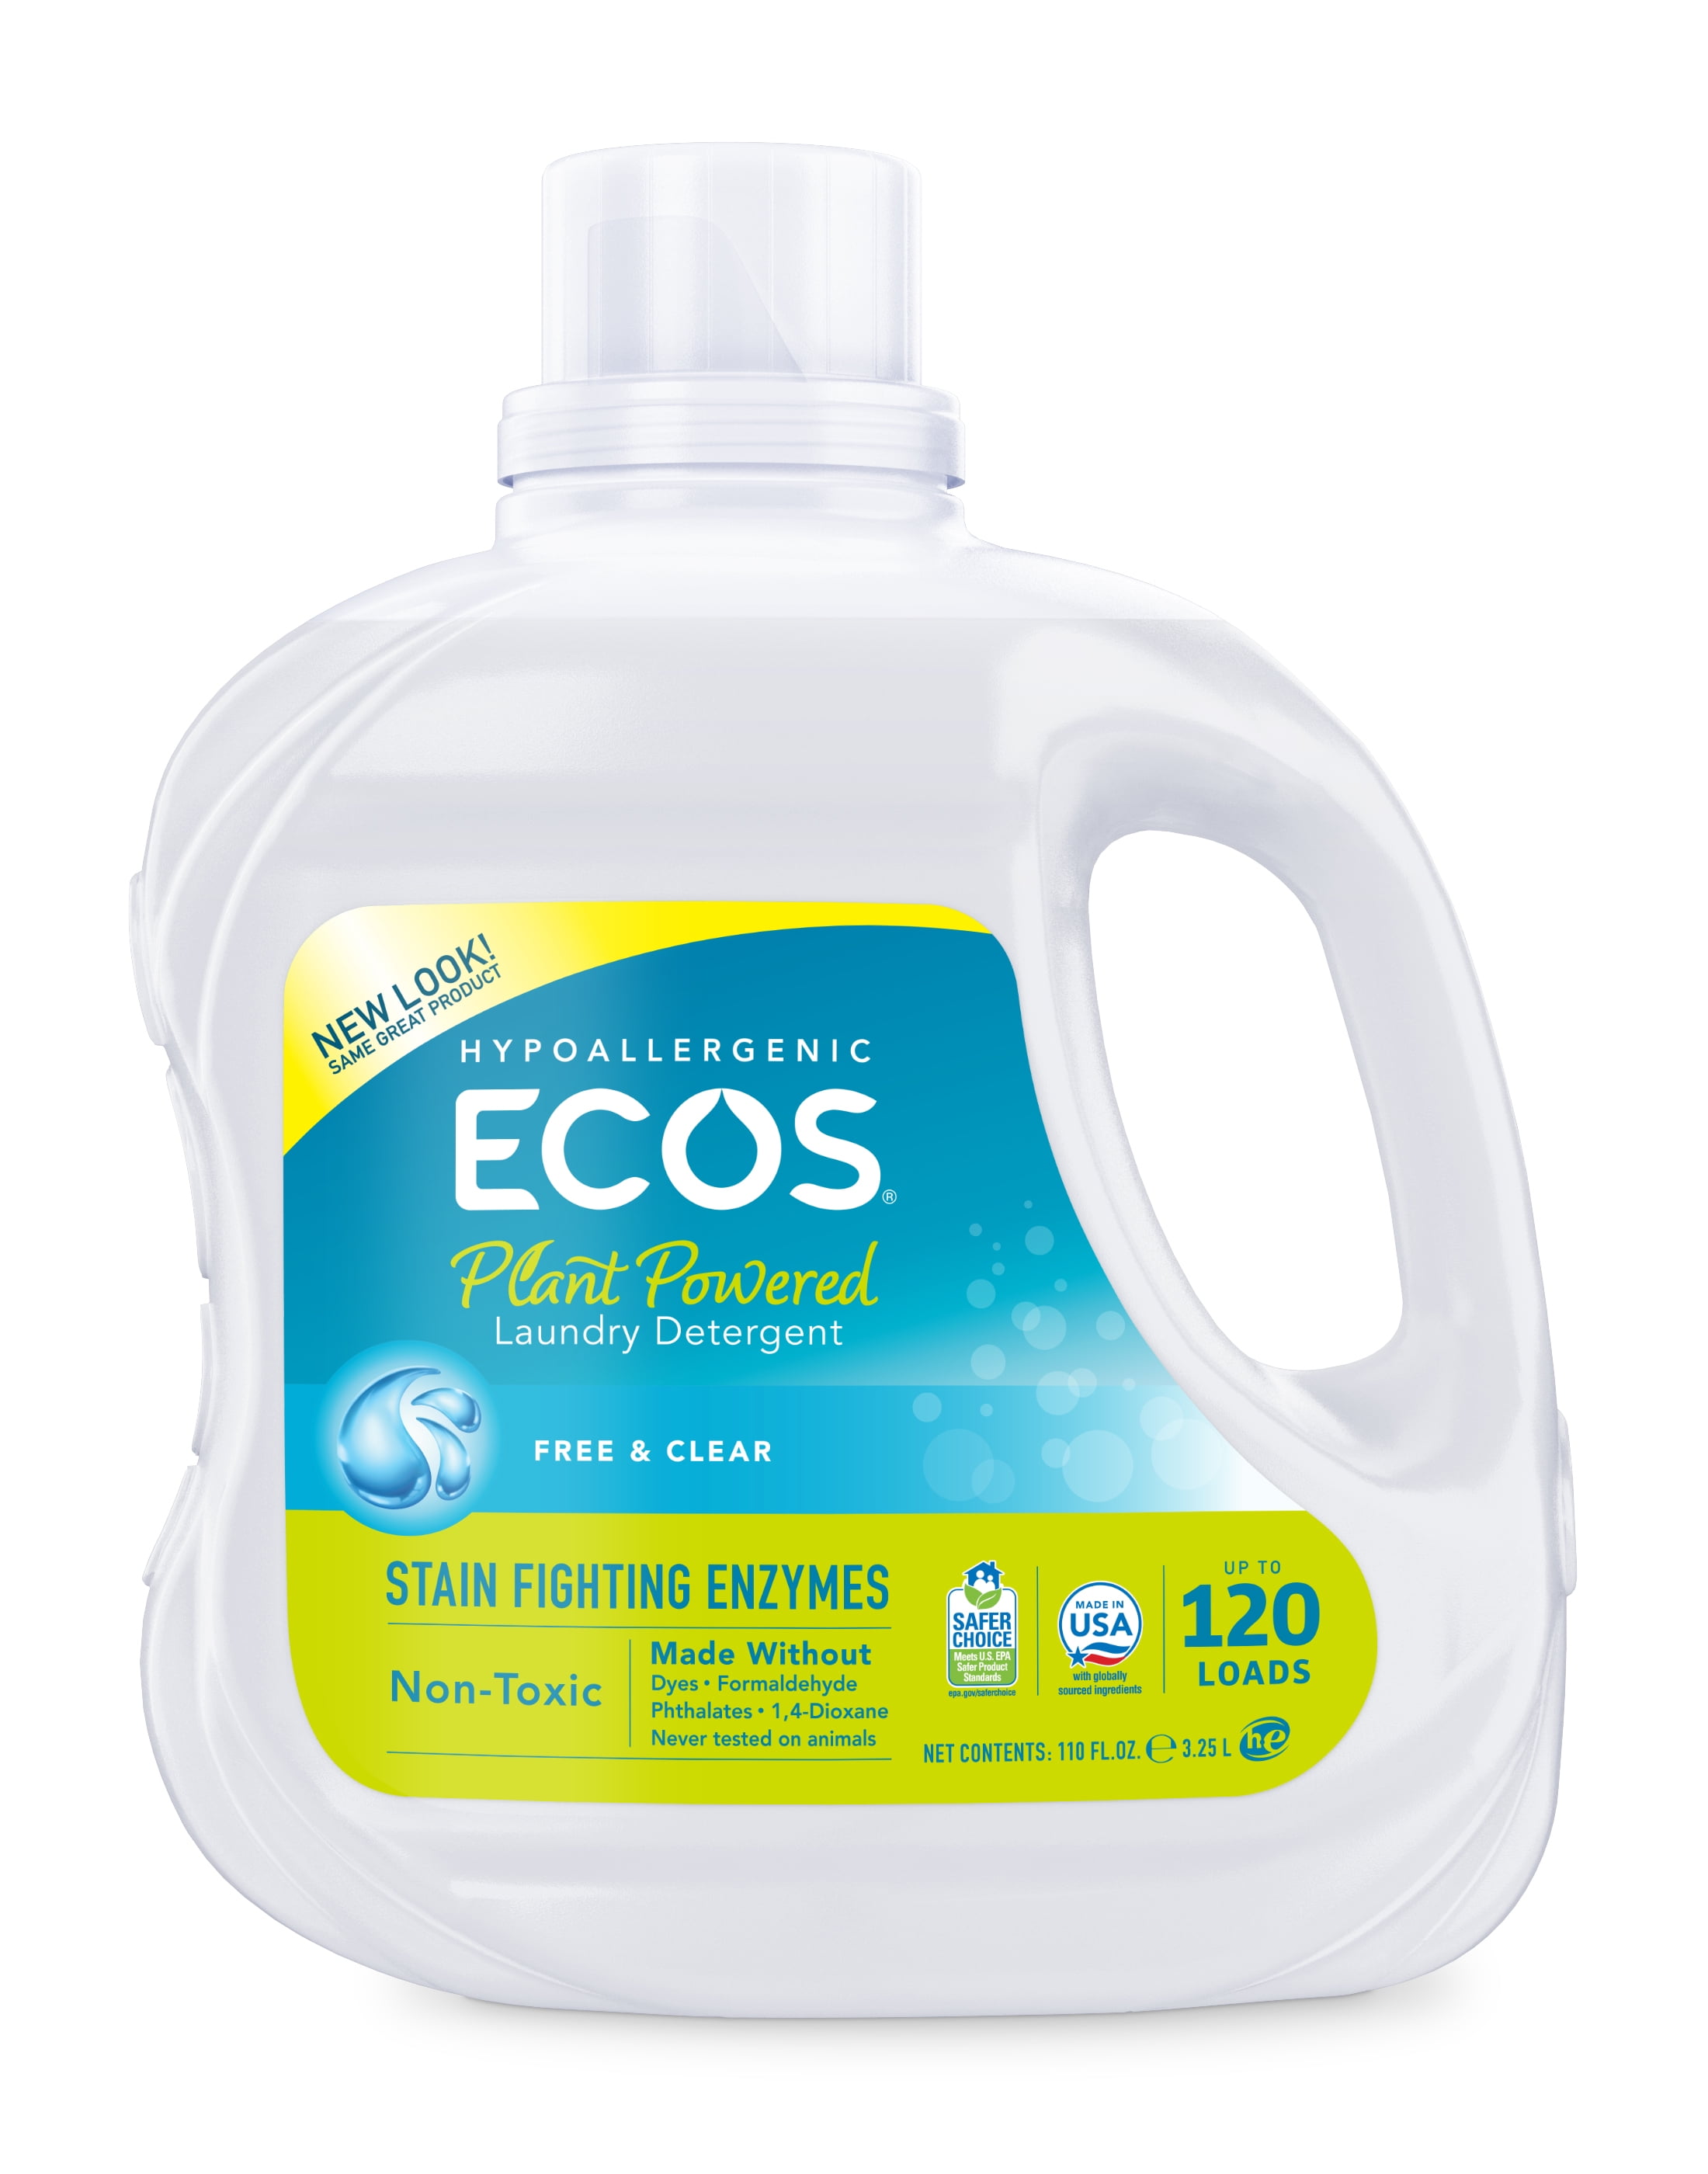 ECOS Plant Powered Liquid Laundry Detergent with Stain-Fighting Enzymes, Free & Clear, 120 Loads, 110 Ounce, Hypoallergenic for sensitive skin